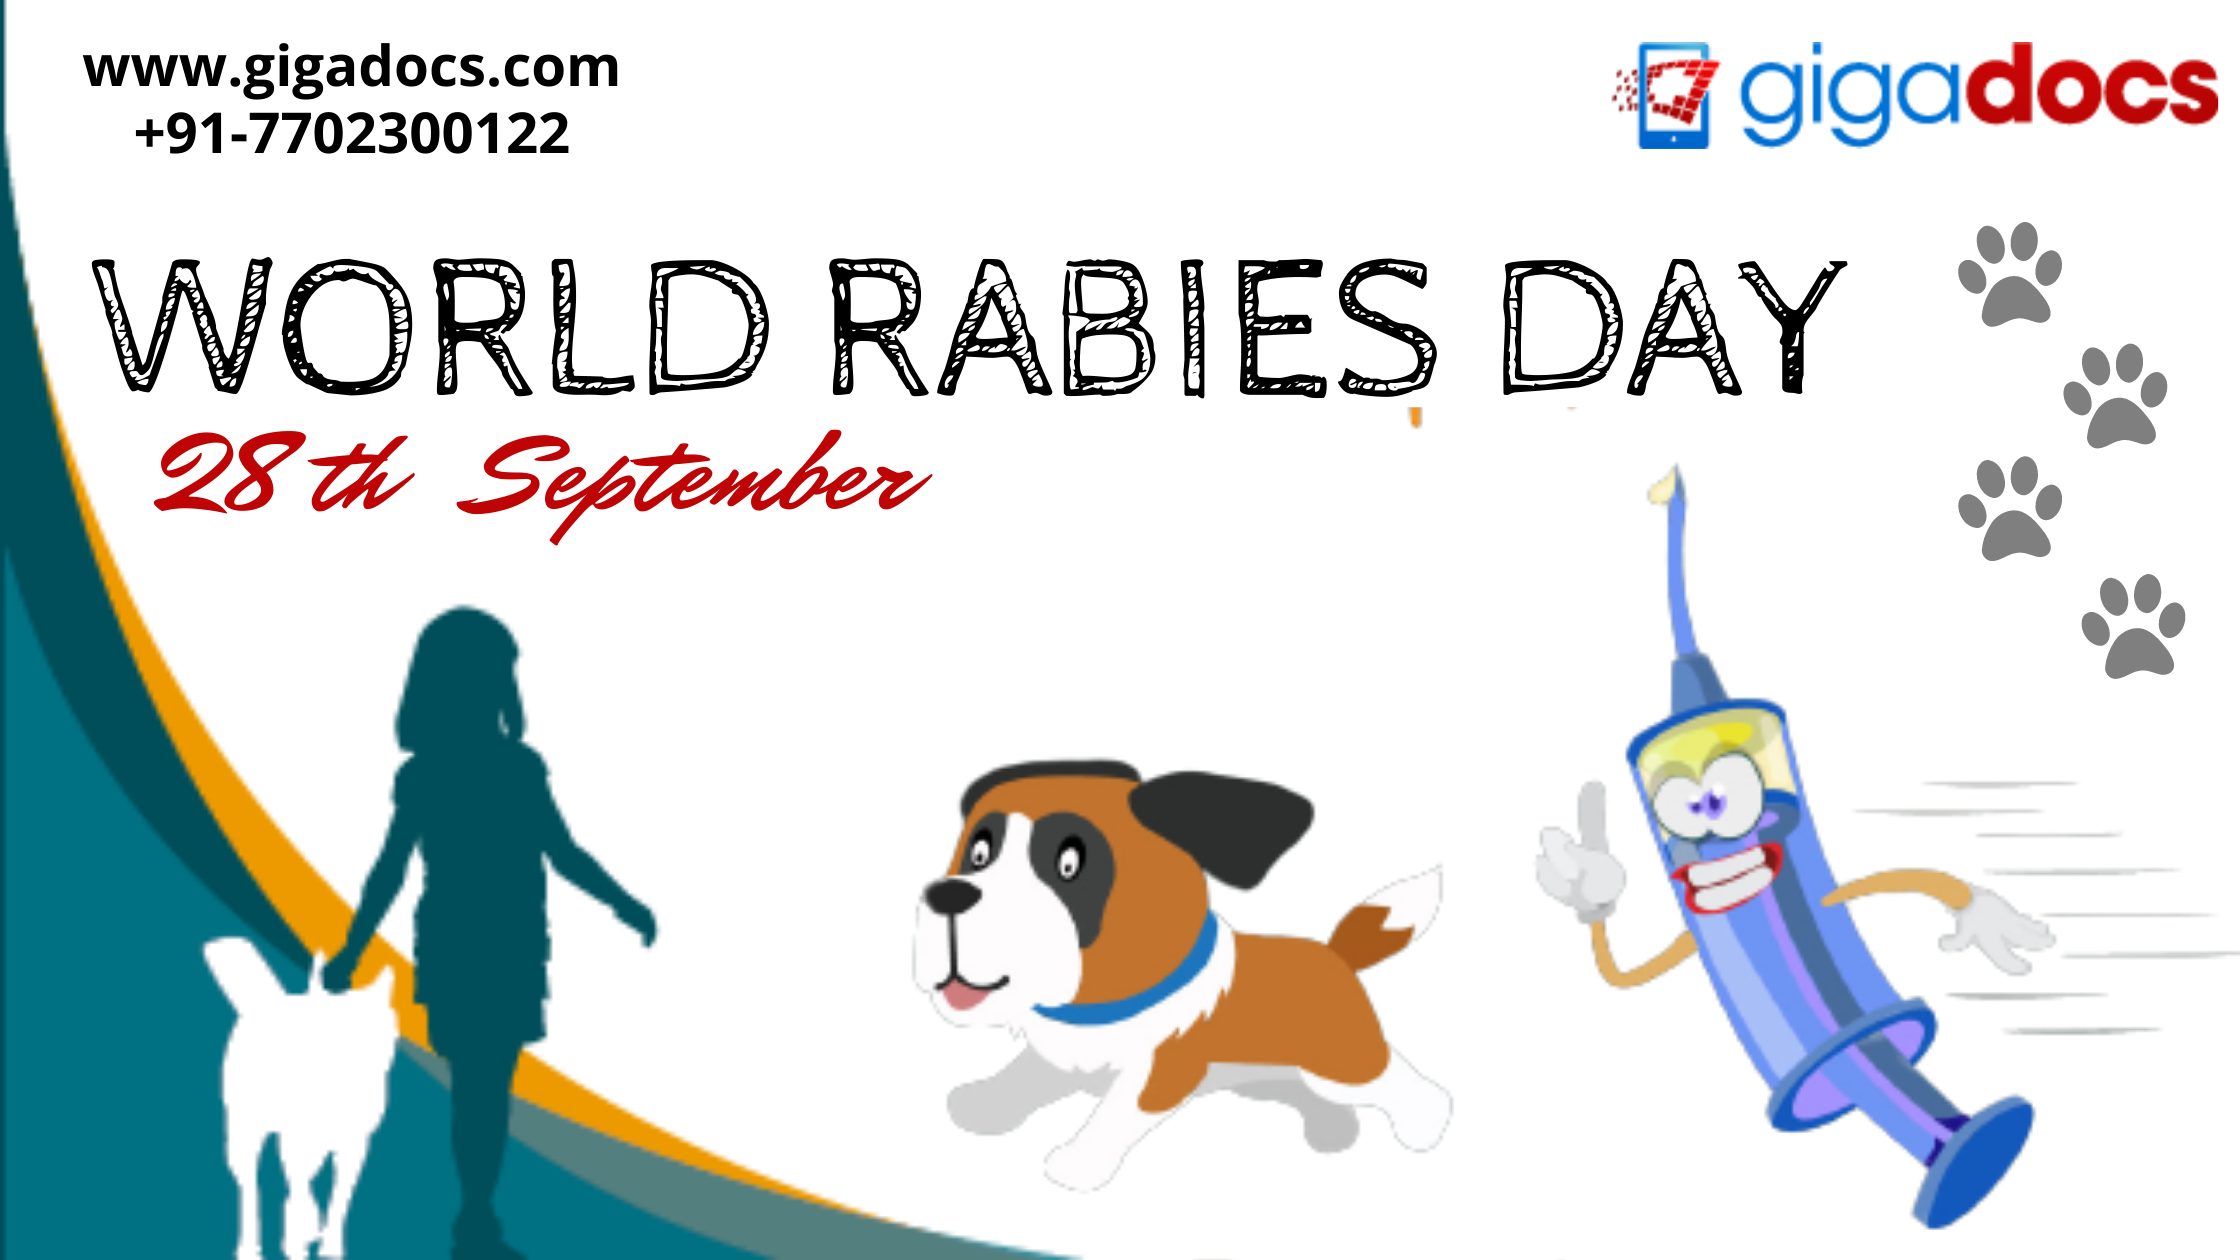 Are only Dogs Rabies Carriers? Busting Rabies Myths with Facts - Gigadocs -  Online Appointment with Best Doctors | Blogs